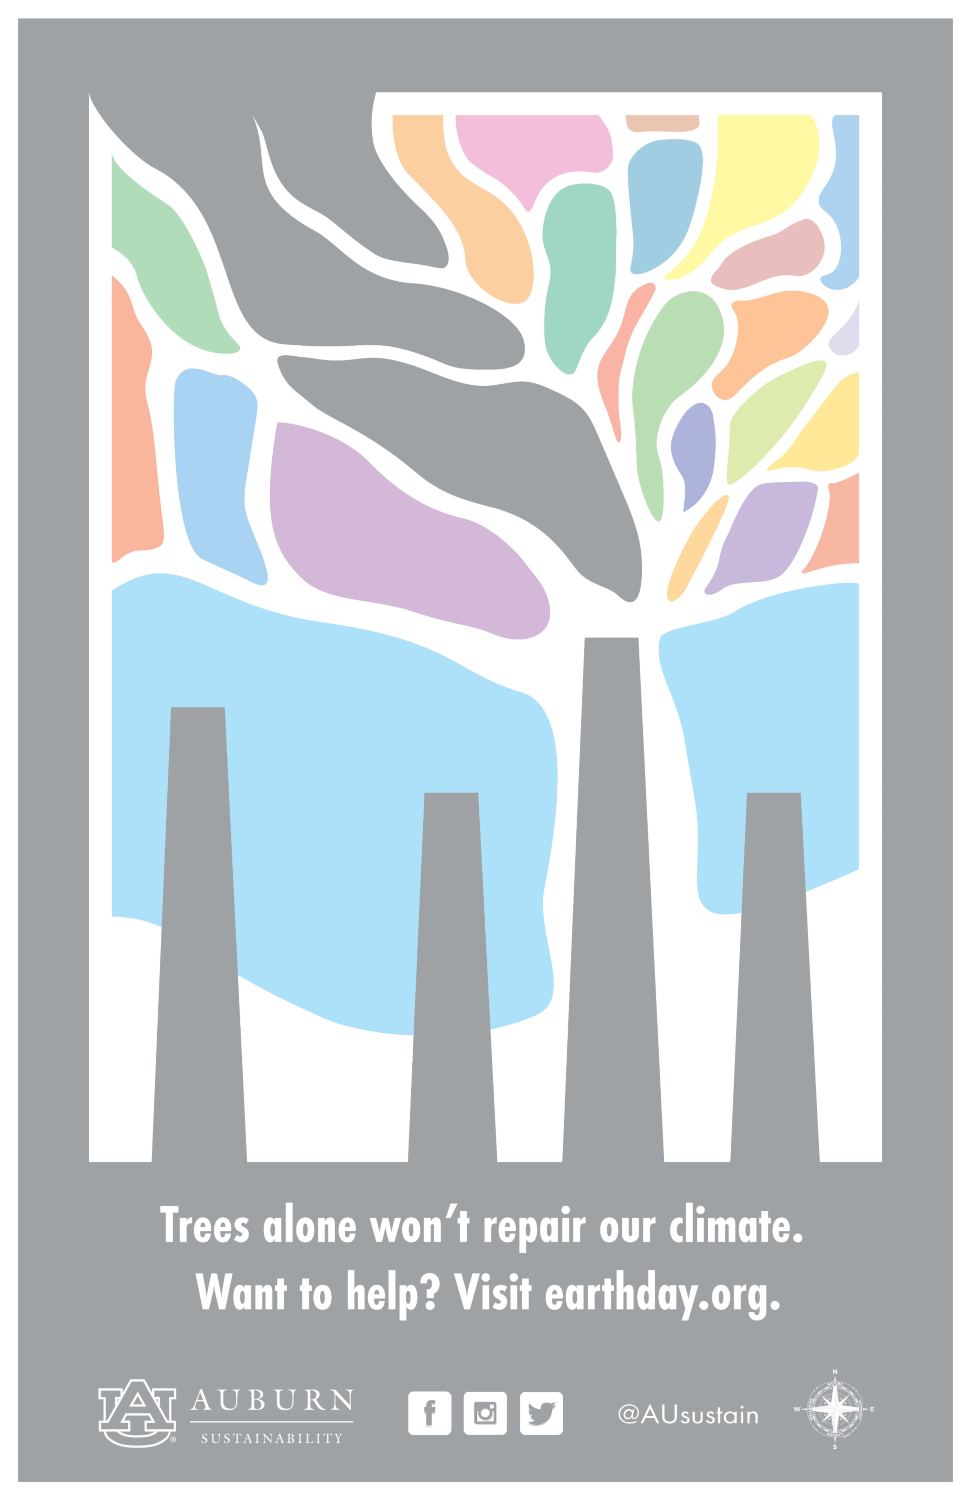 Graphic saying "Trees alone won't repair our climate. Want to help? Visit earthday.org.